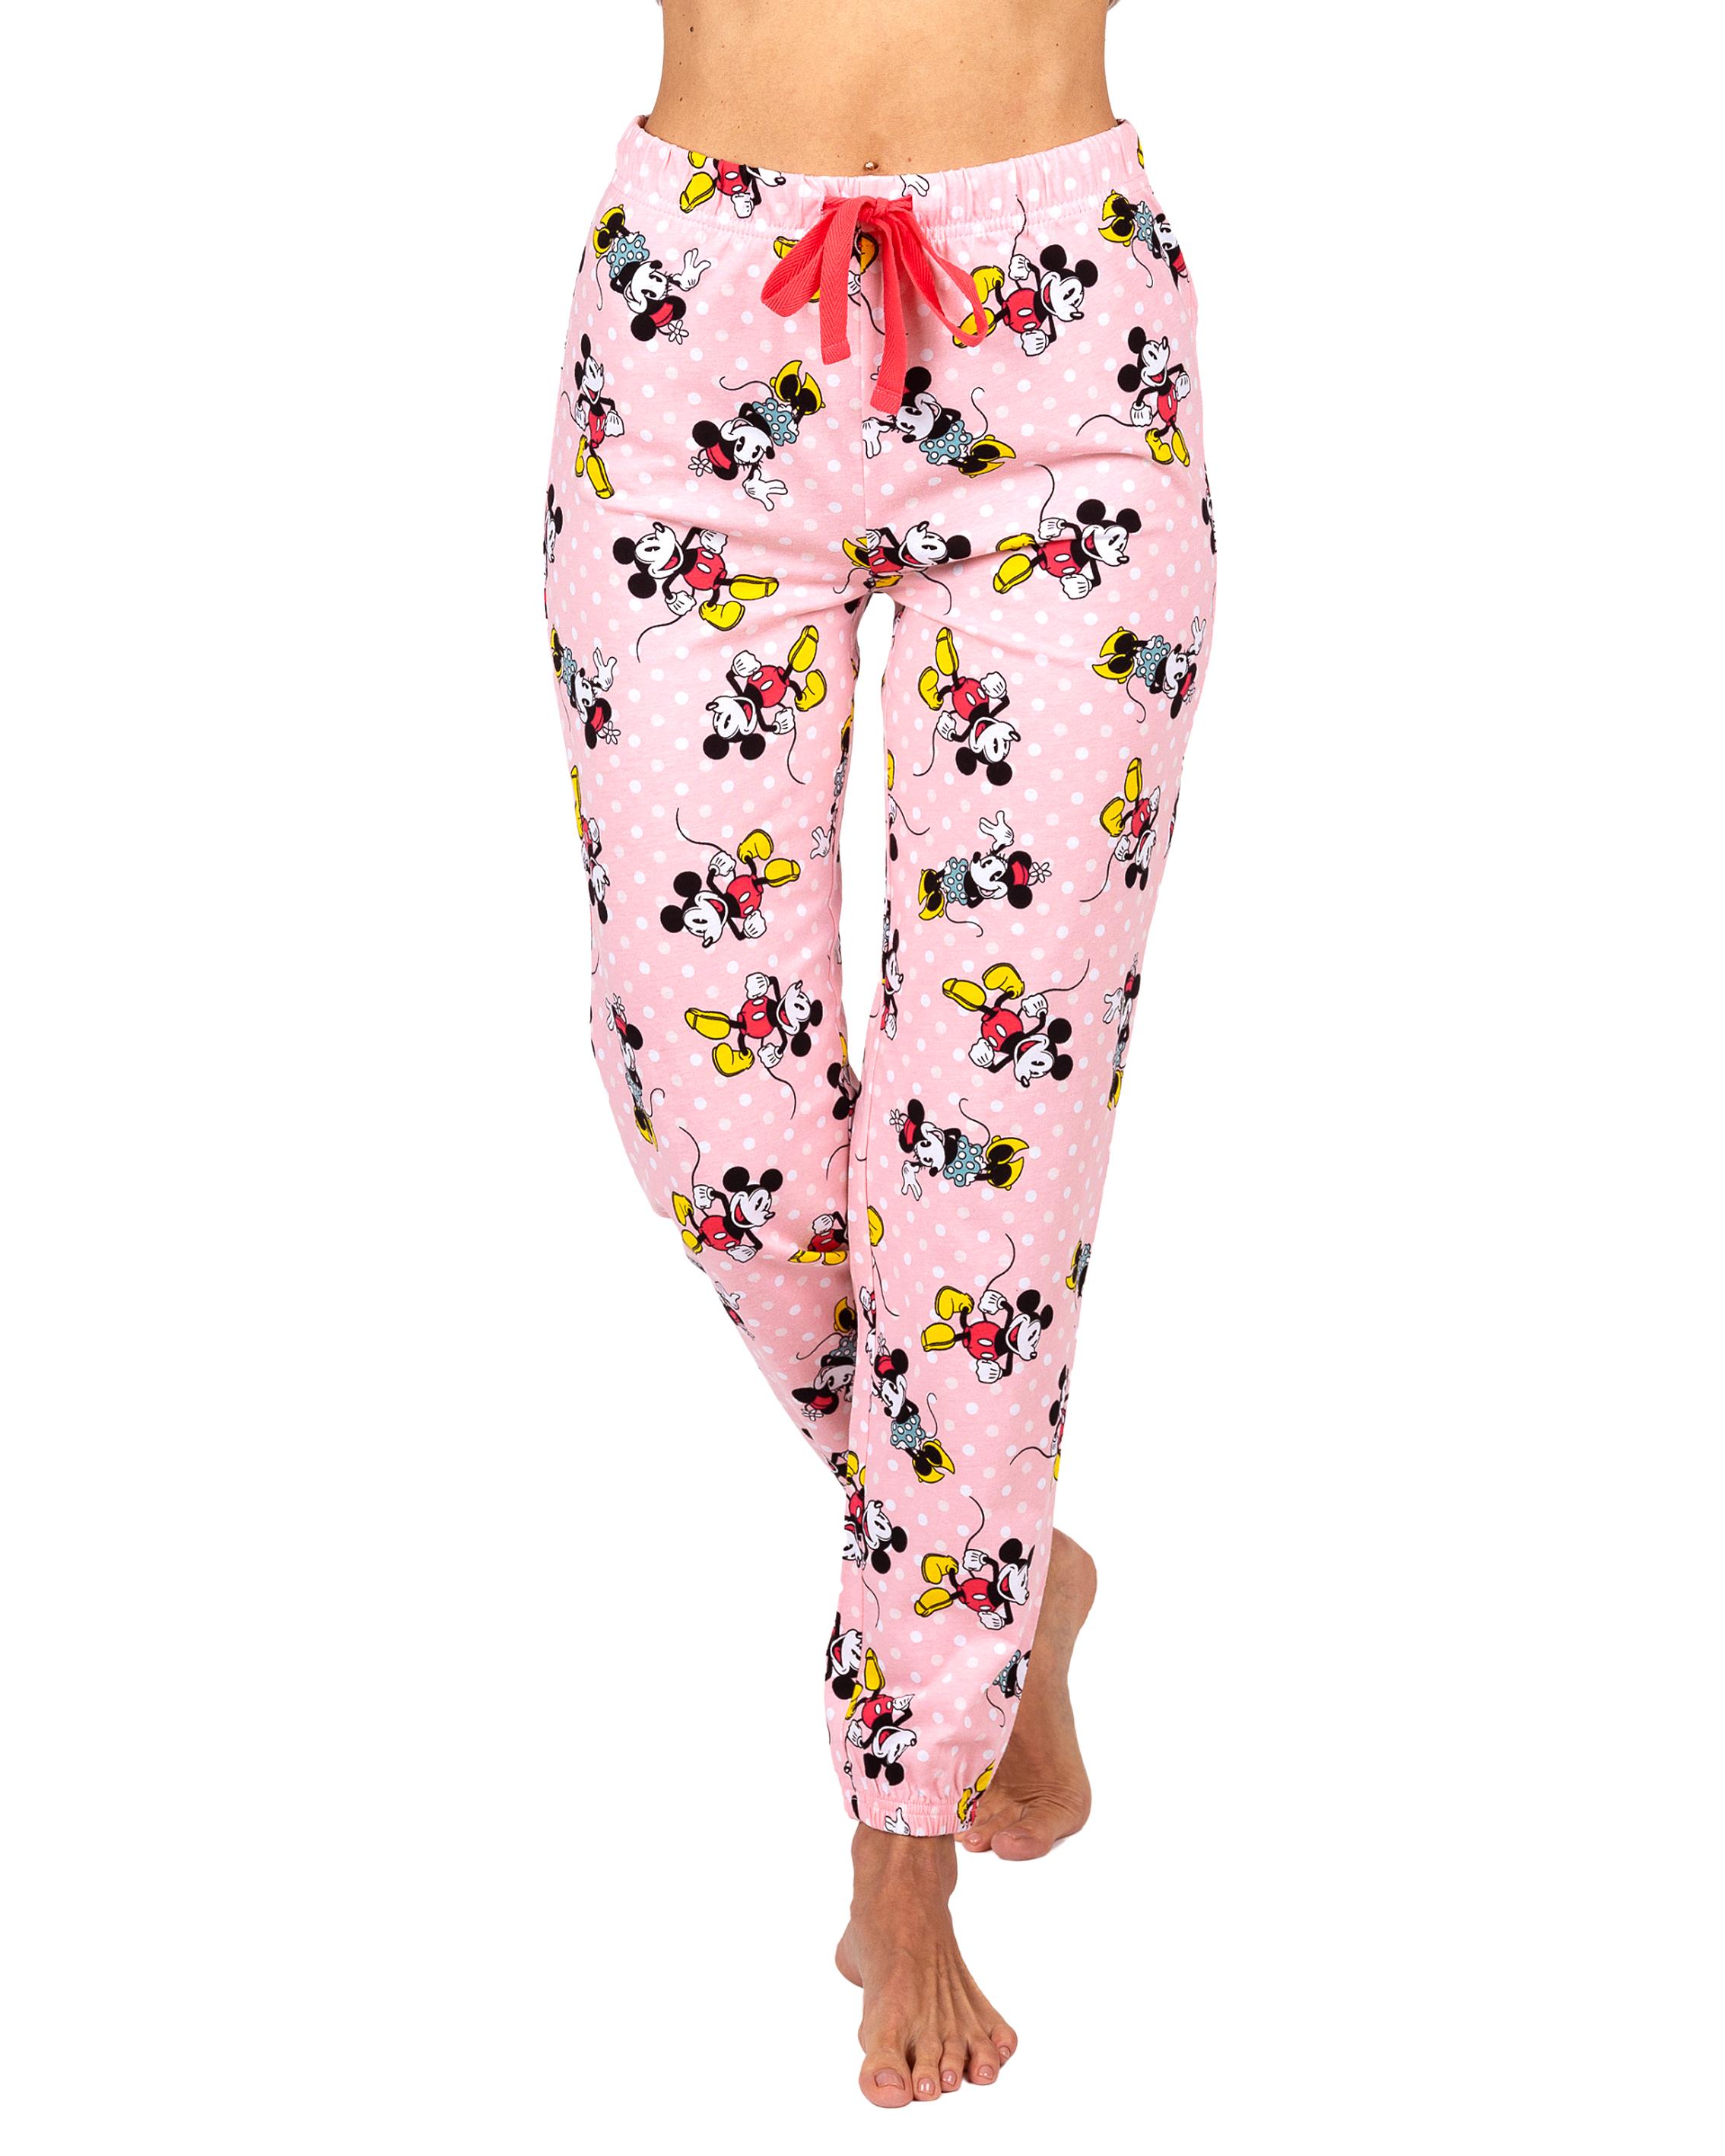 Disney Mickey and Minnie Mouse Womens Cotton Pajama Pants, Sleepwear Bottoms, Mickey and Minnie, Size: 2X, Mickey Mouse - image 2 of 4